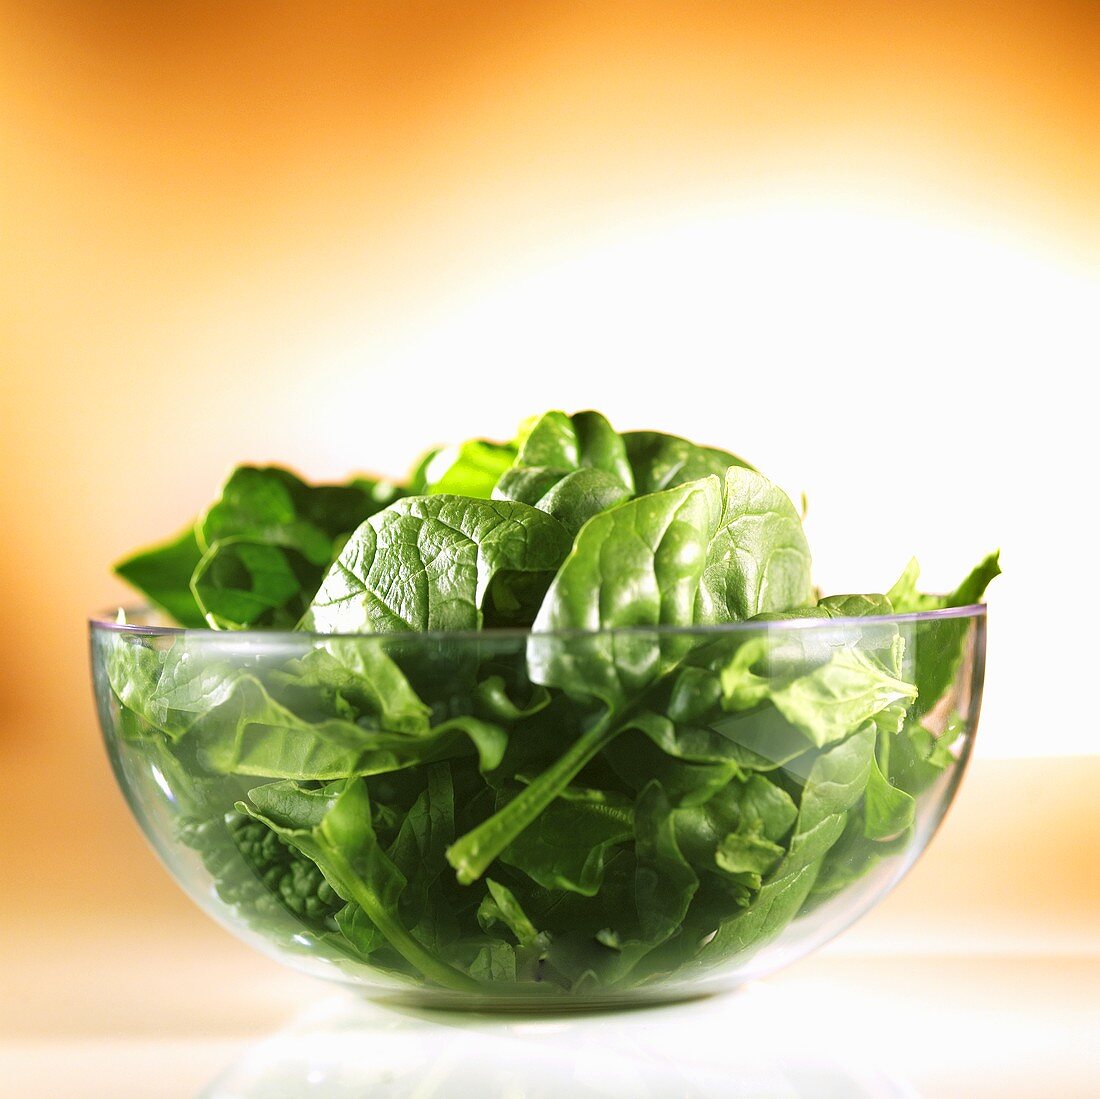 Spinach leaves in a glass bowl